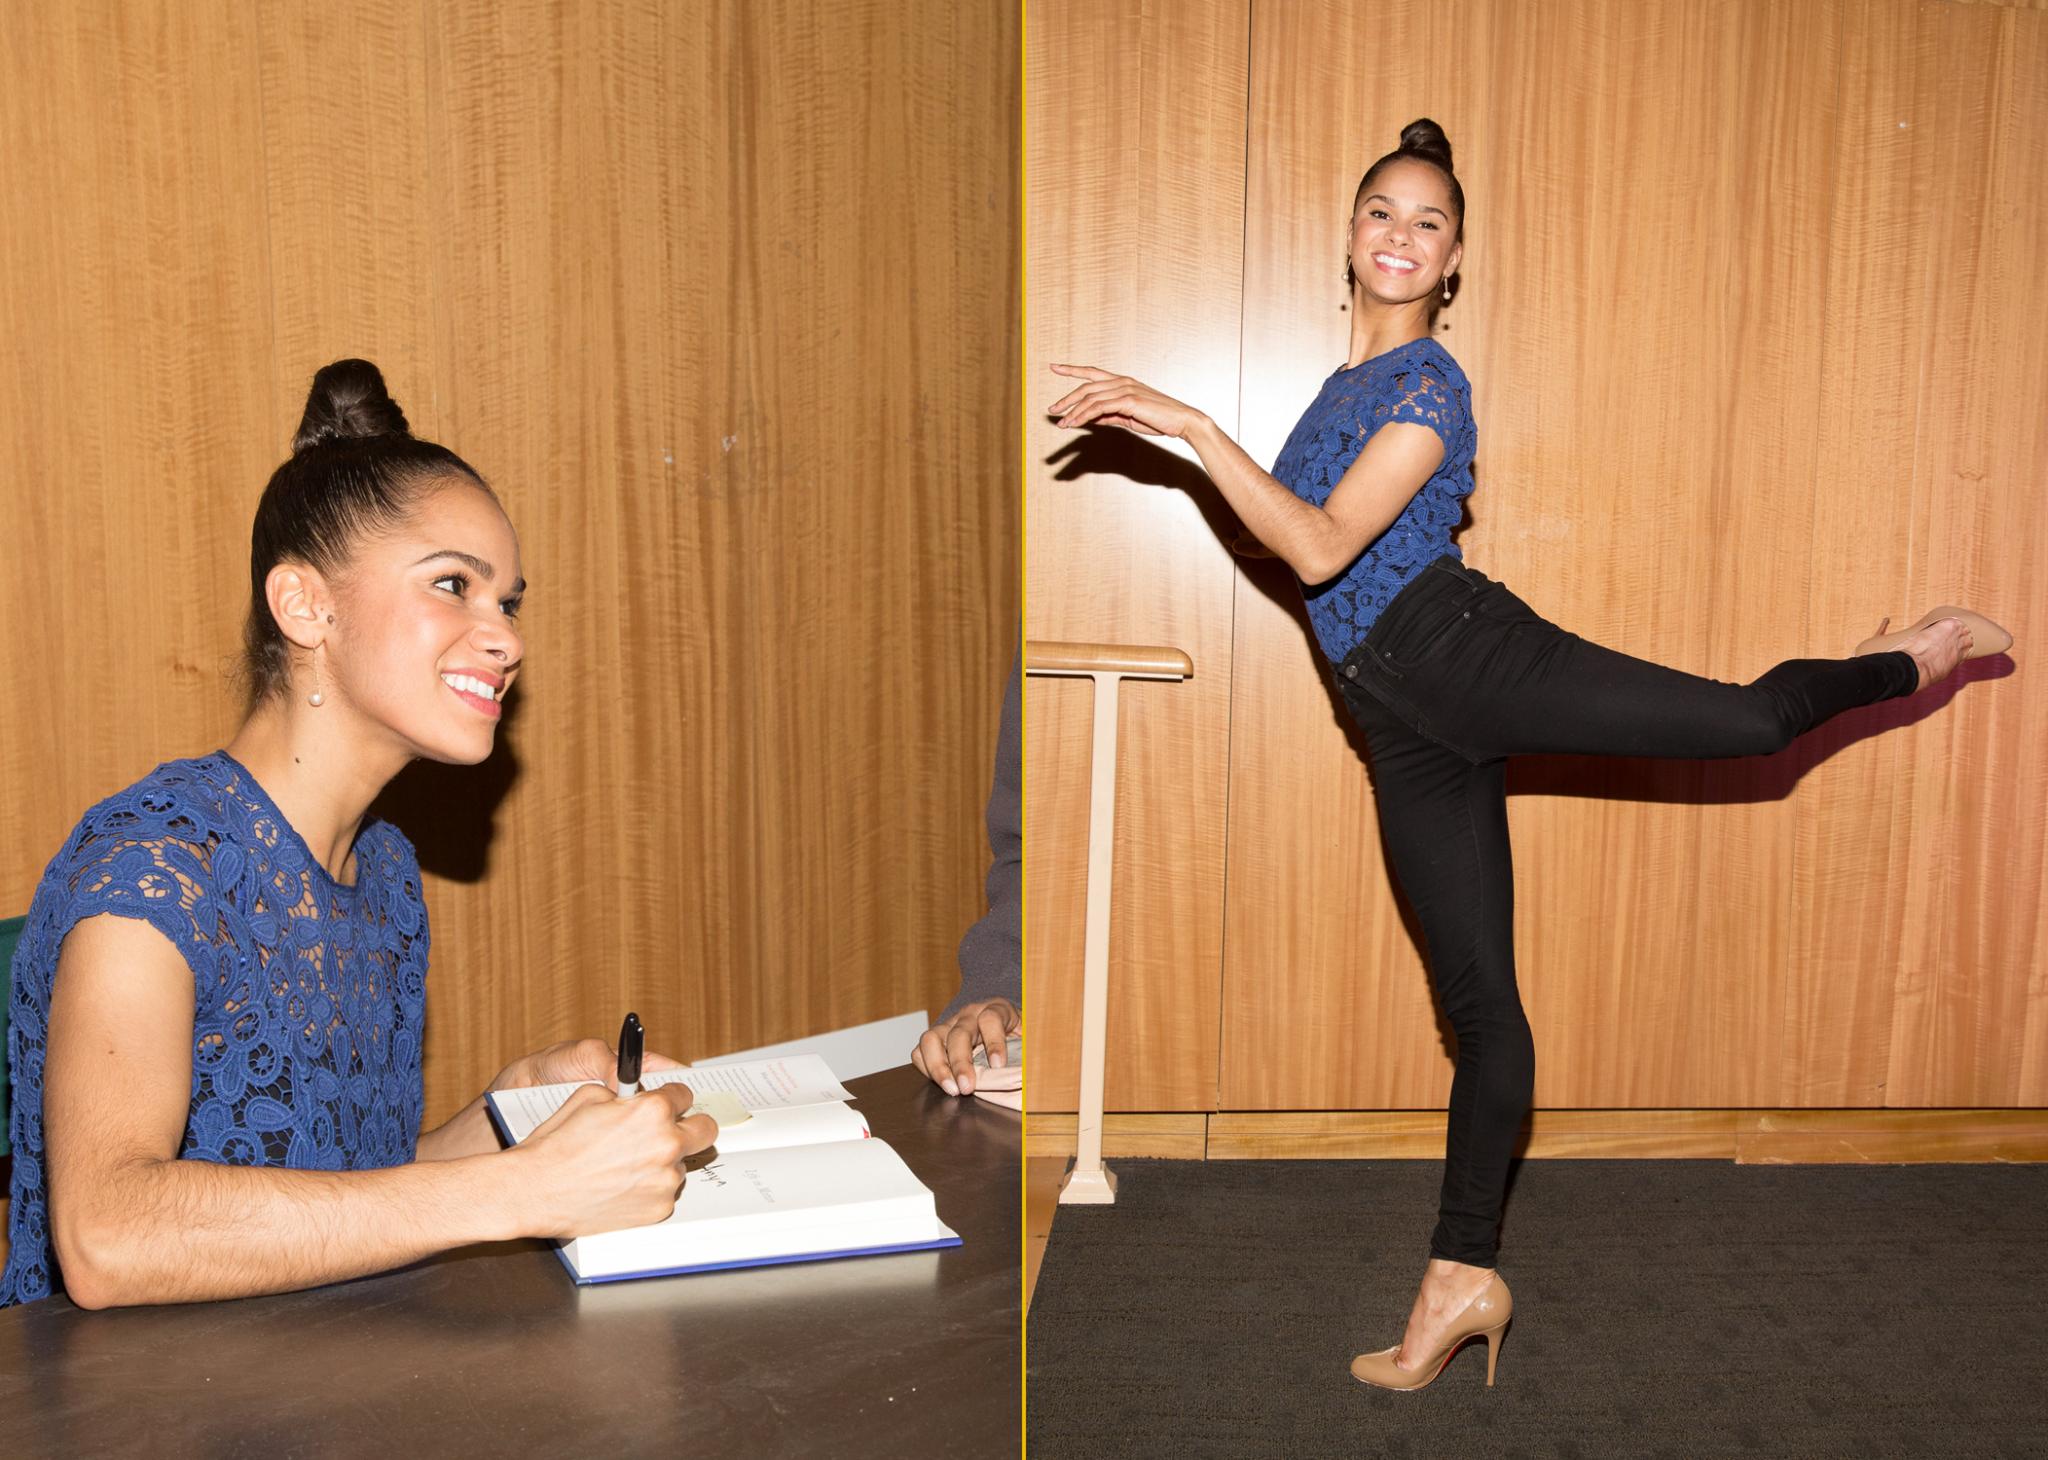 Biopic of Ballerina Misty Copeland in the Works